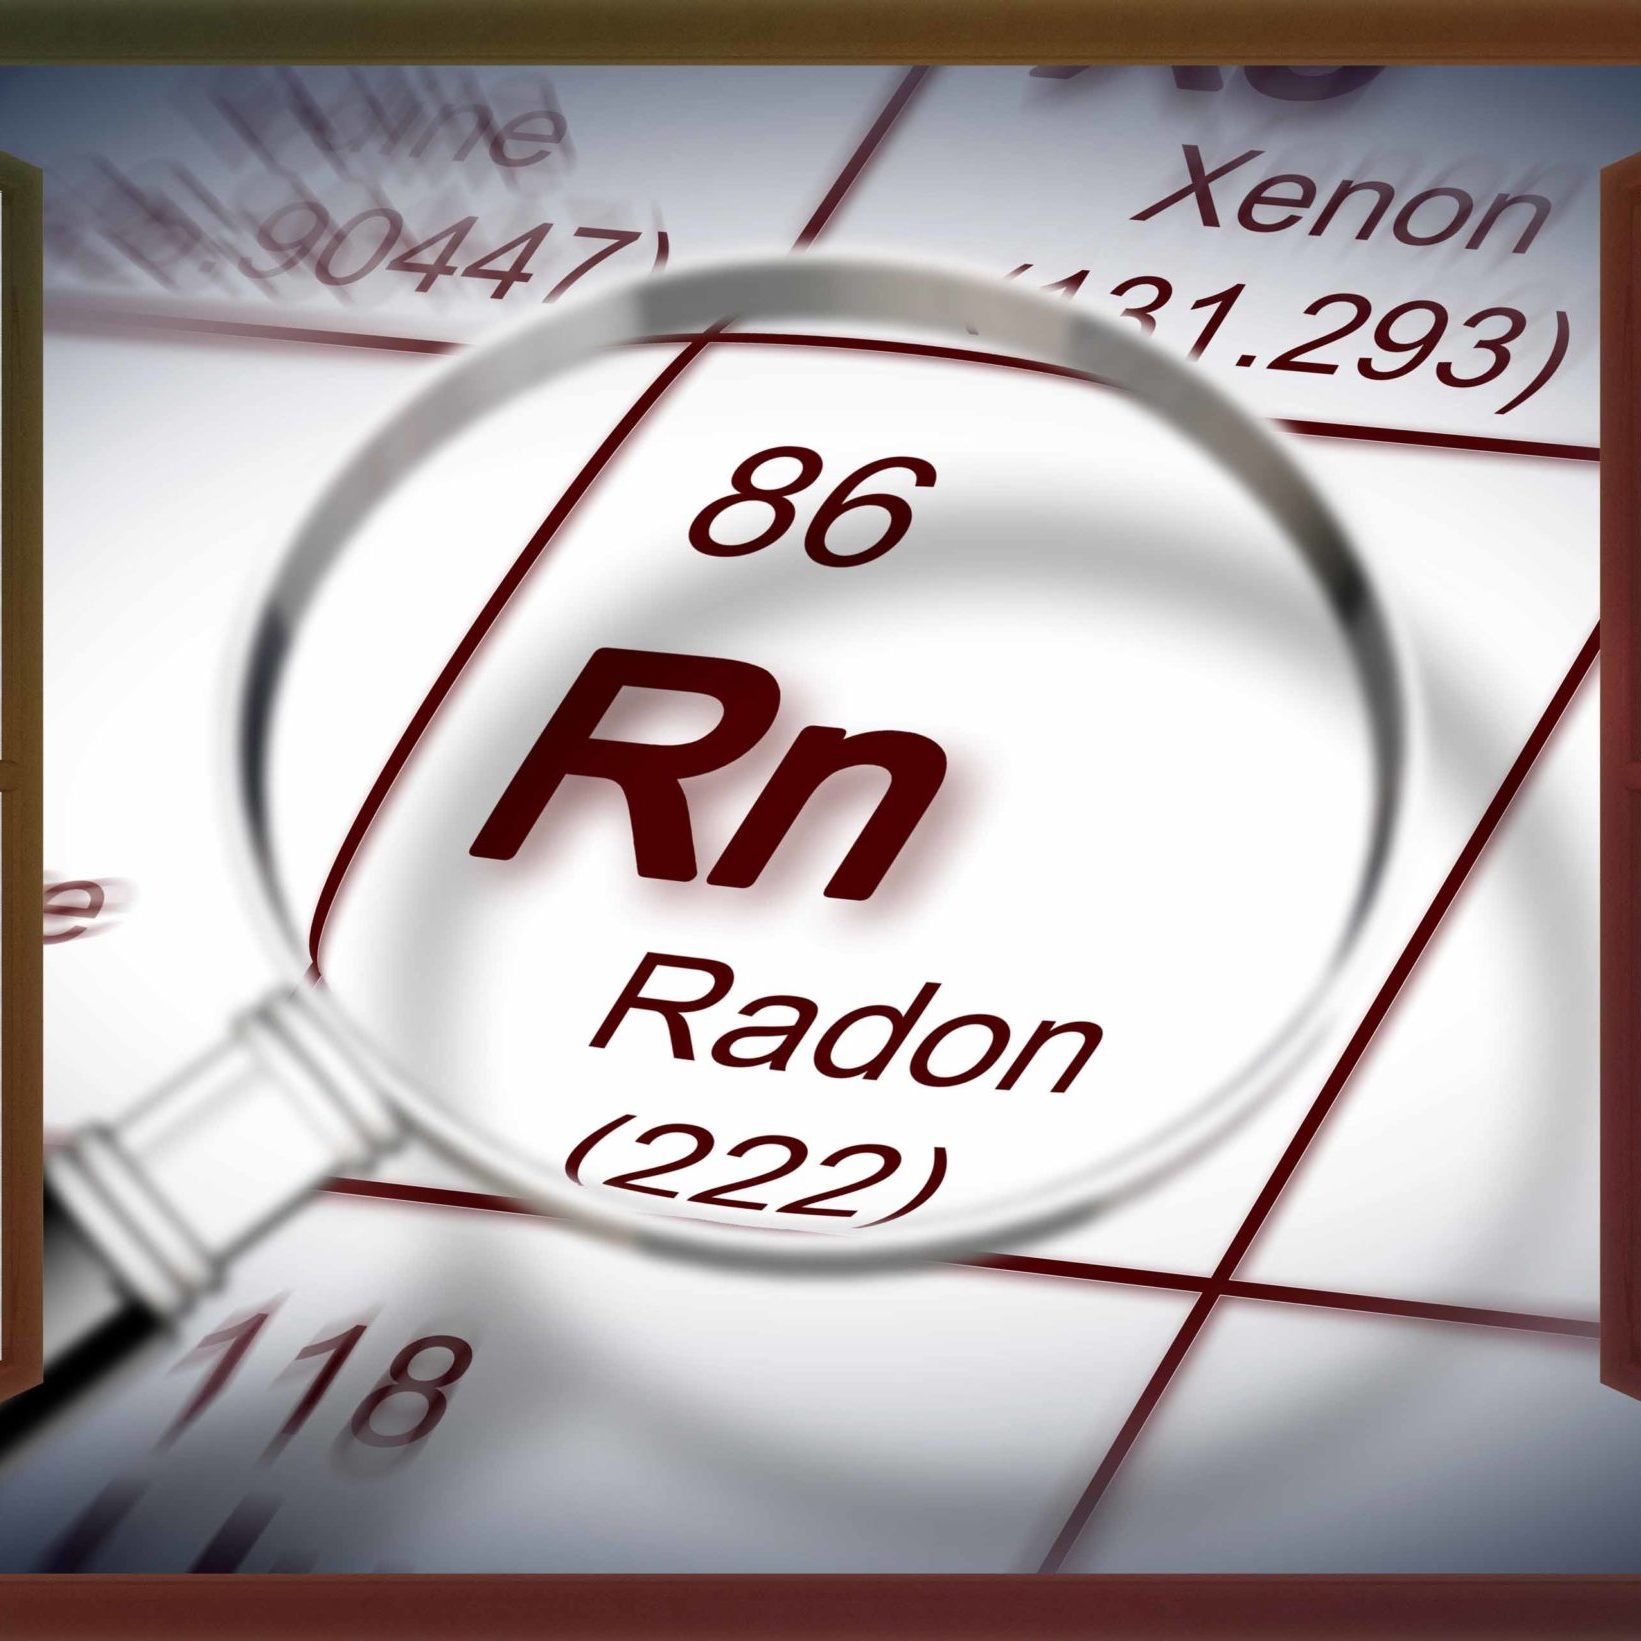 The danger of radon gas in our homes - concept image with periodic table of the elements and magnifying lens seen through a window